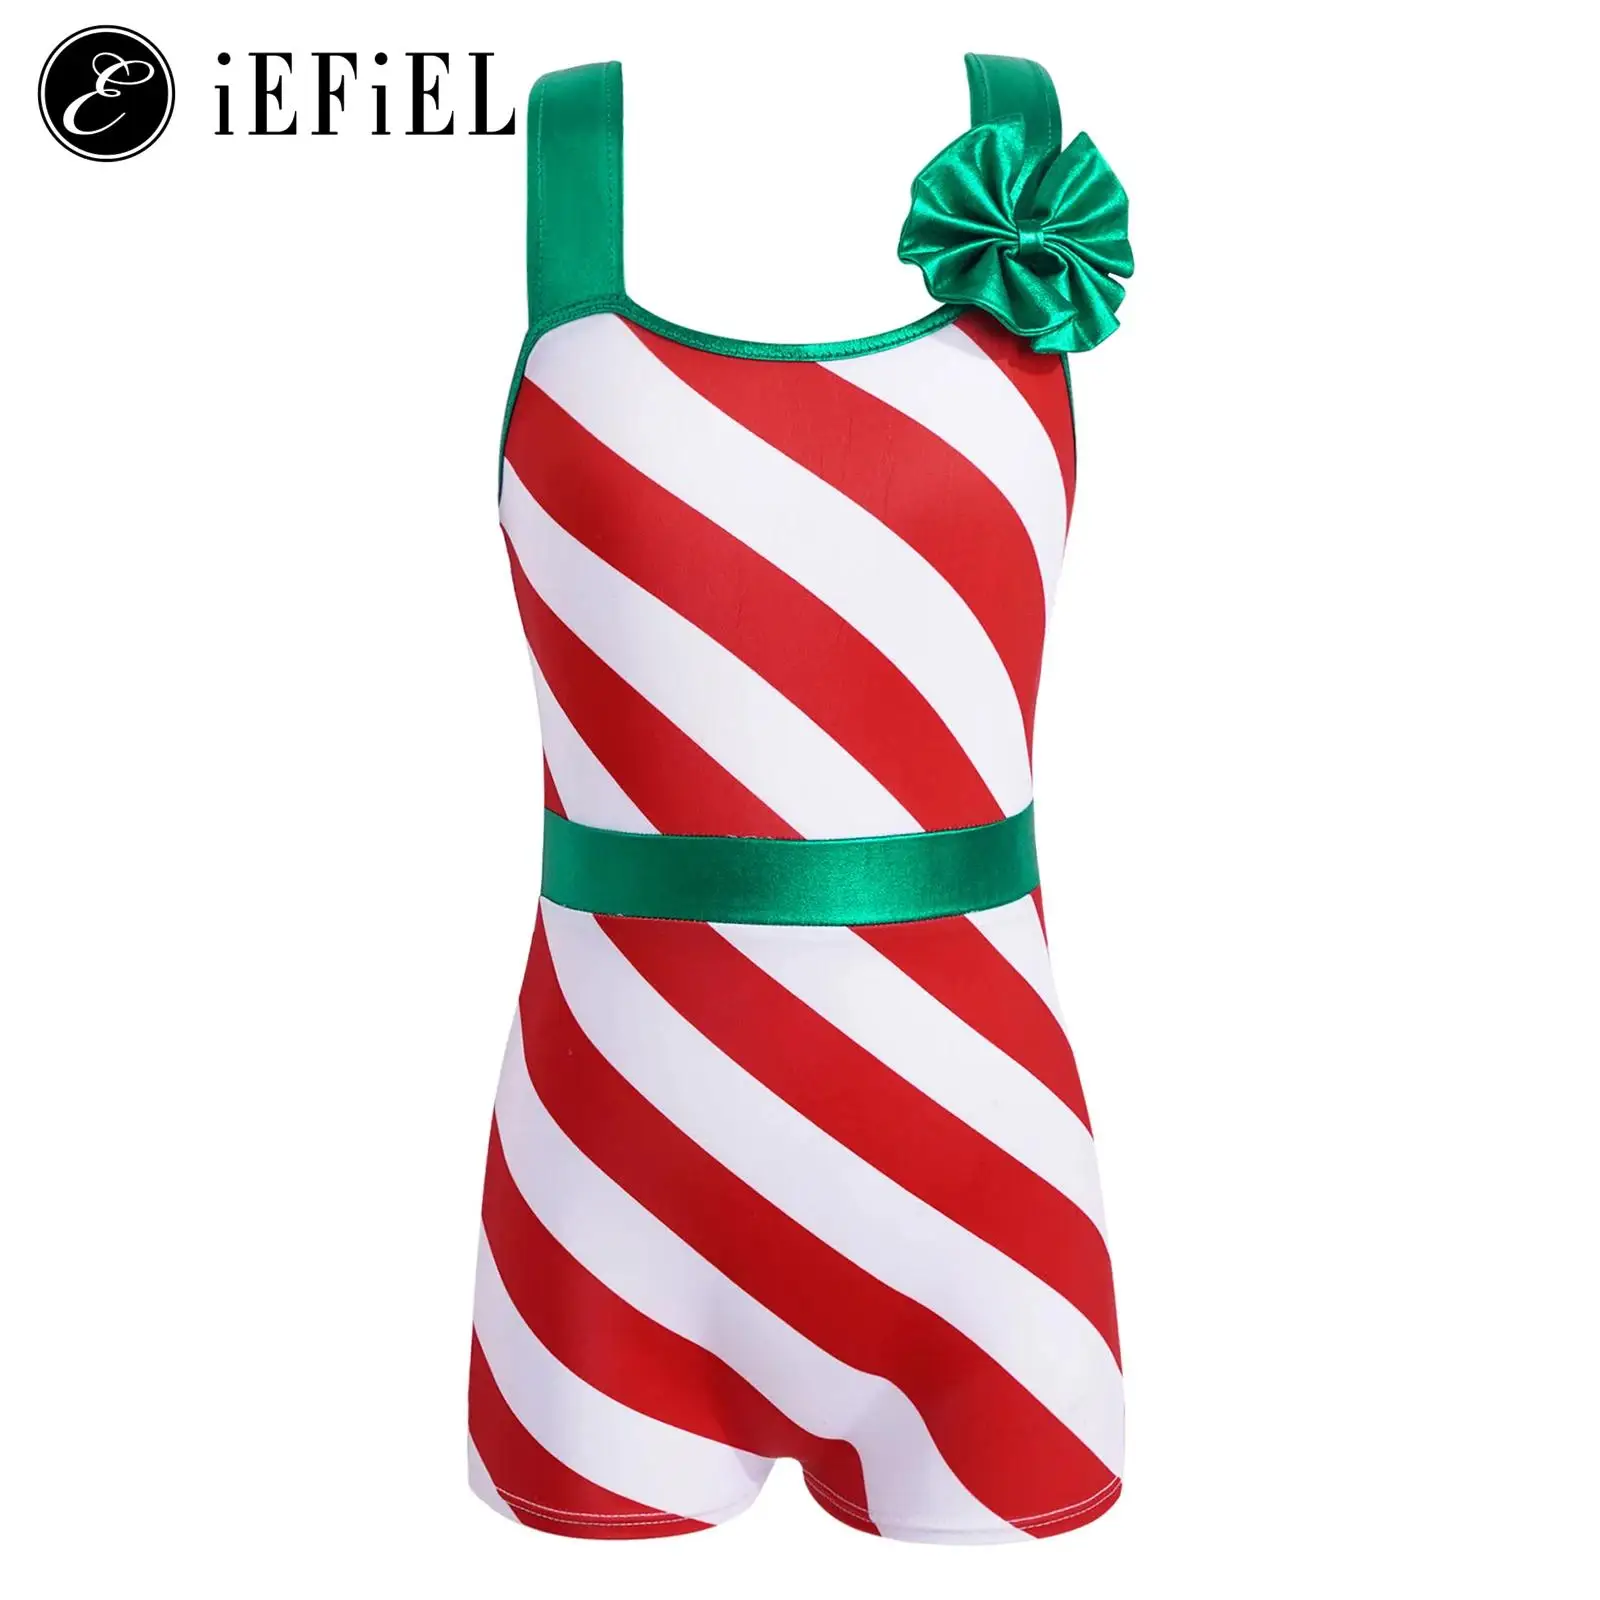 

Kids Girls Candy Cane Christmas Costume One Piece Striped Criss Cross Back Tank Unitard Jumpsuit for Xmas Dance Festive Outfit